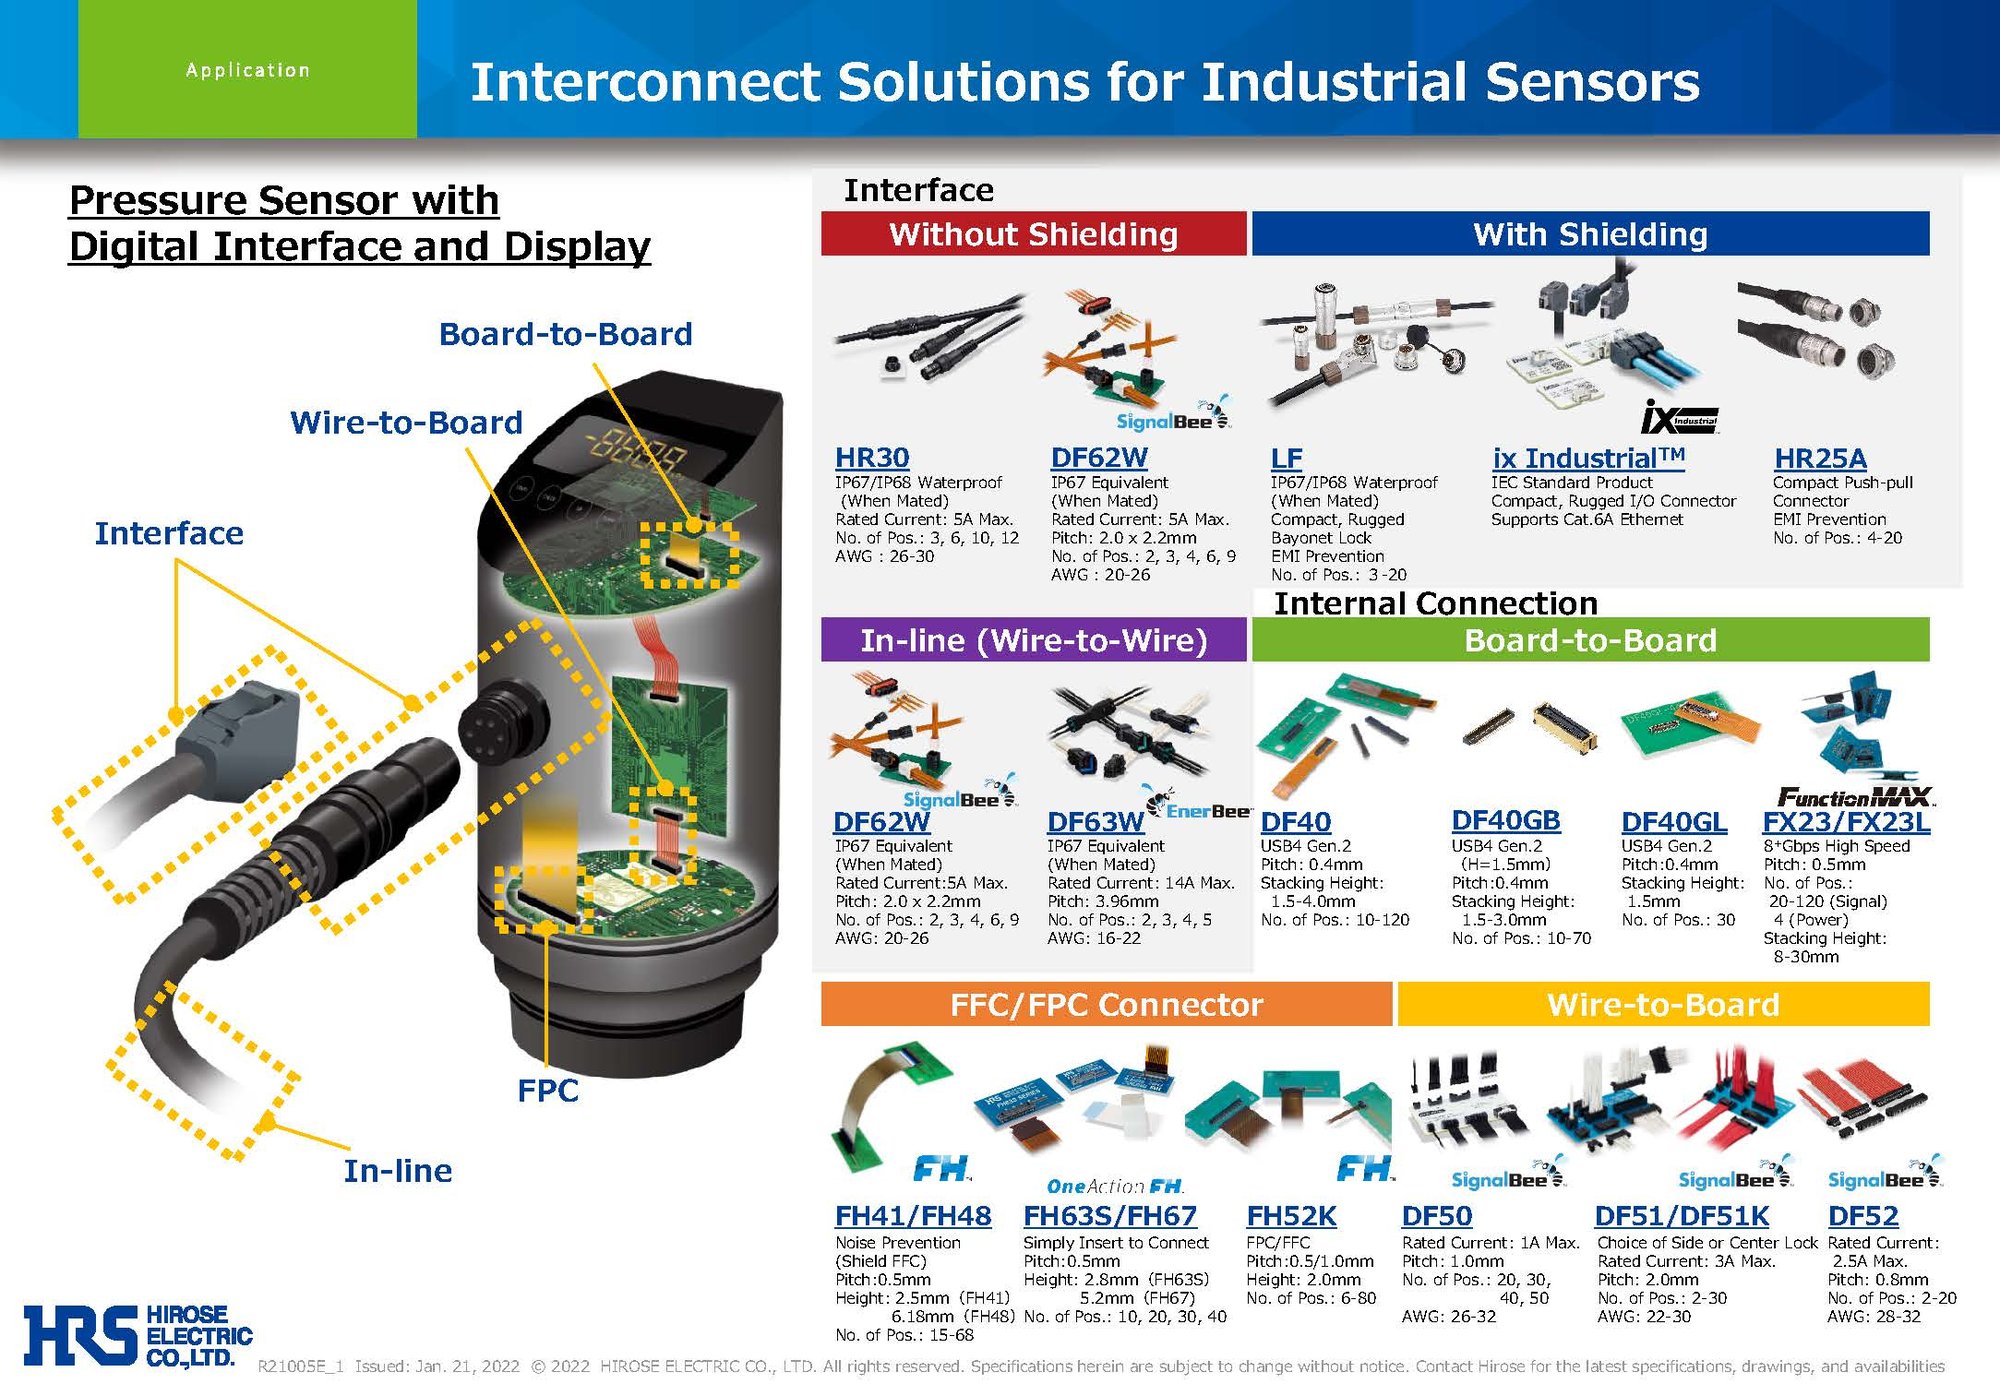 Hirose's Industrial Sensors interconnect solution for advanced technological applications.